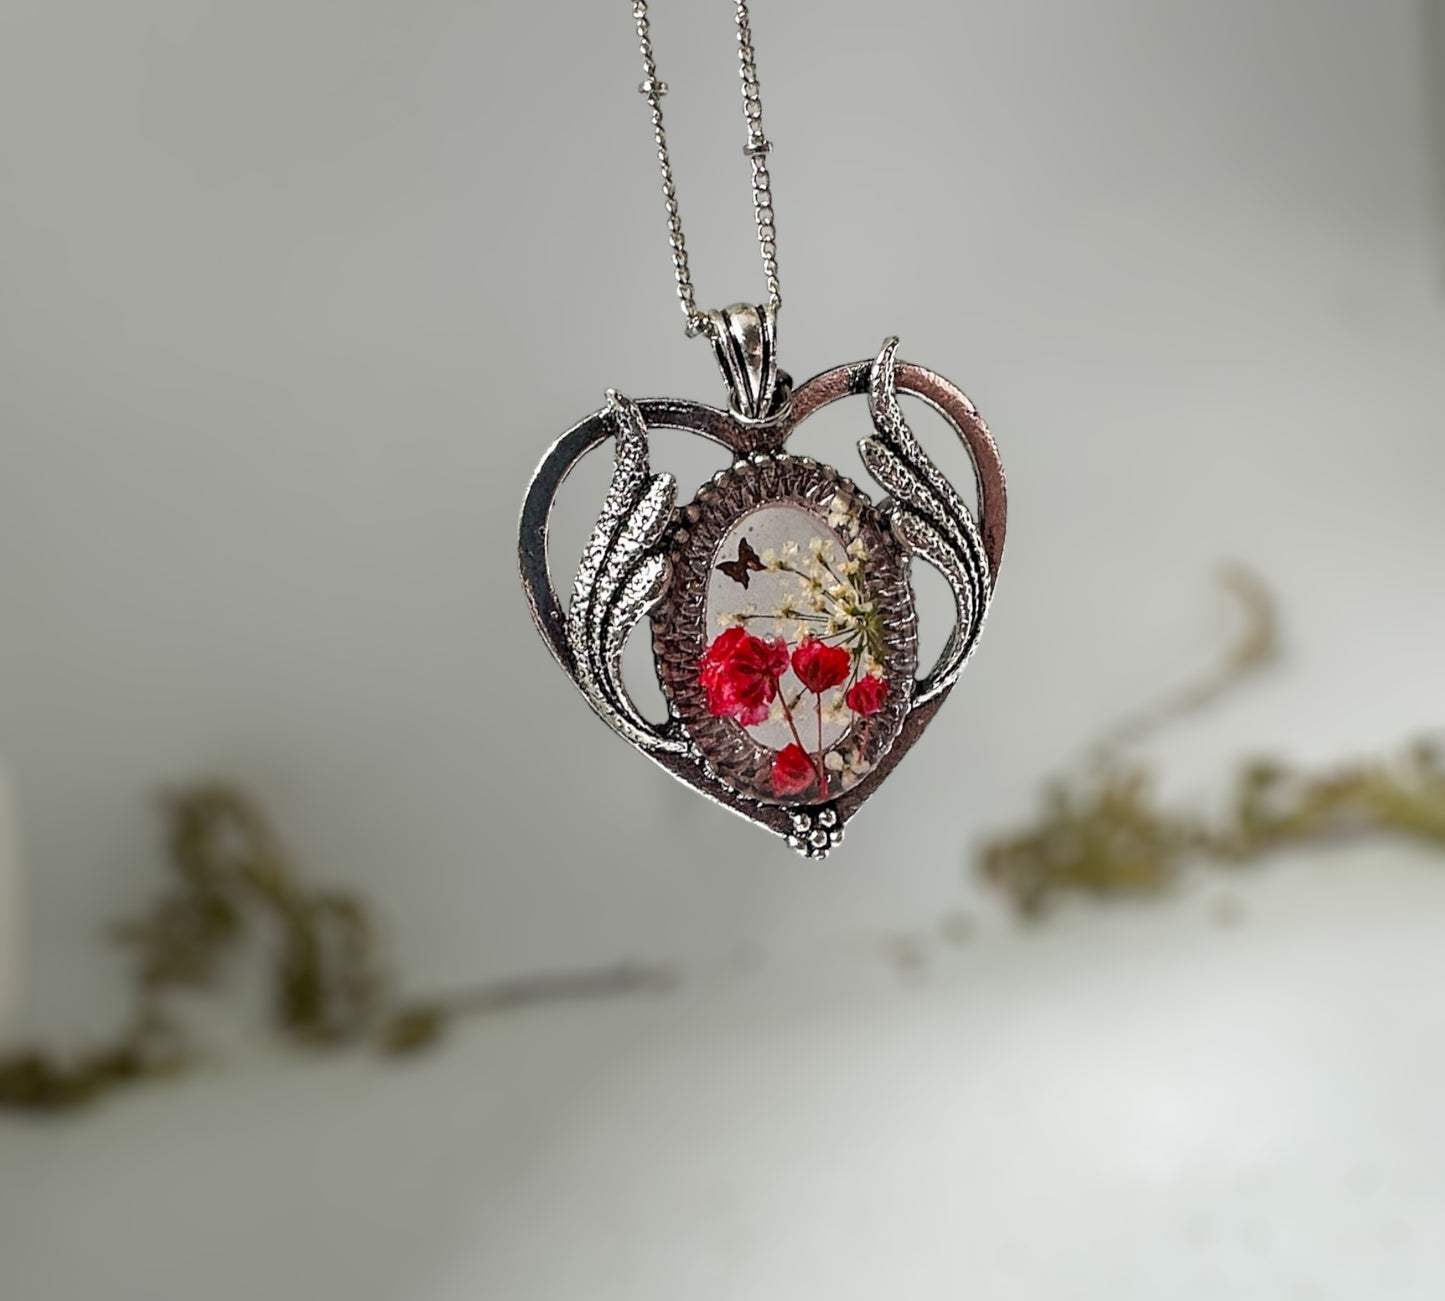 Red Heart Necklace - Dried Pressed Floral Heart Rose Necklace